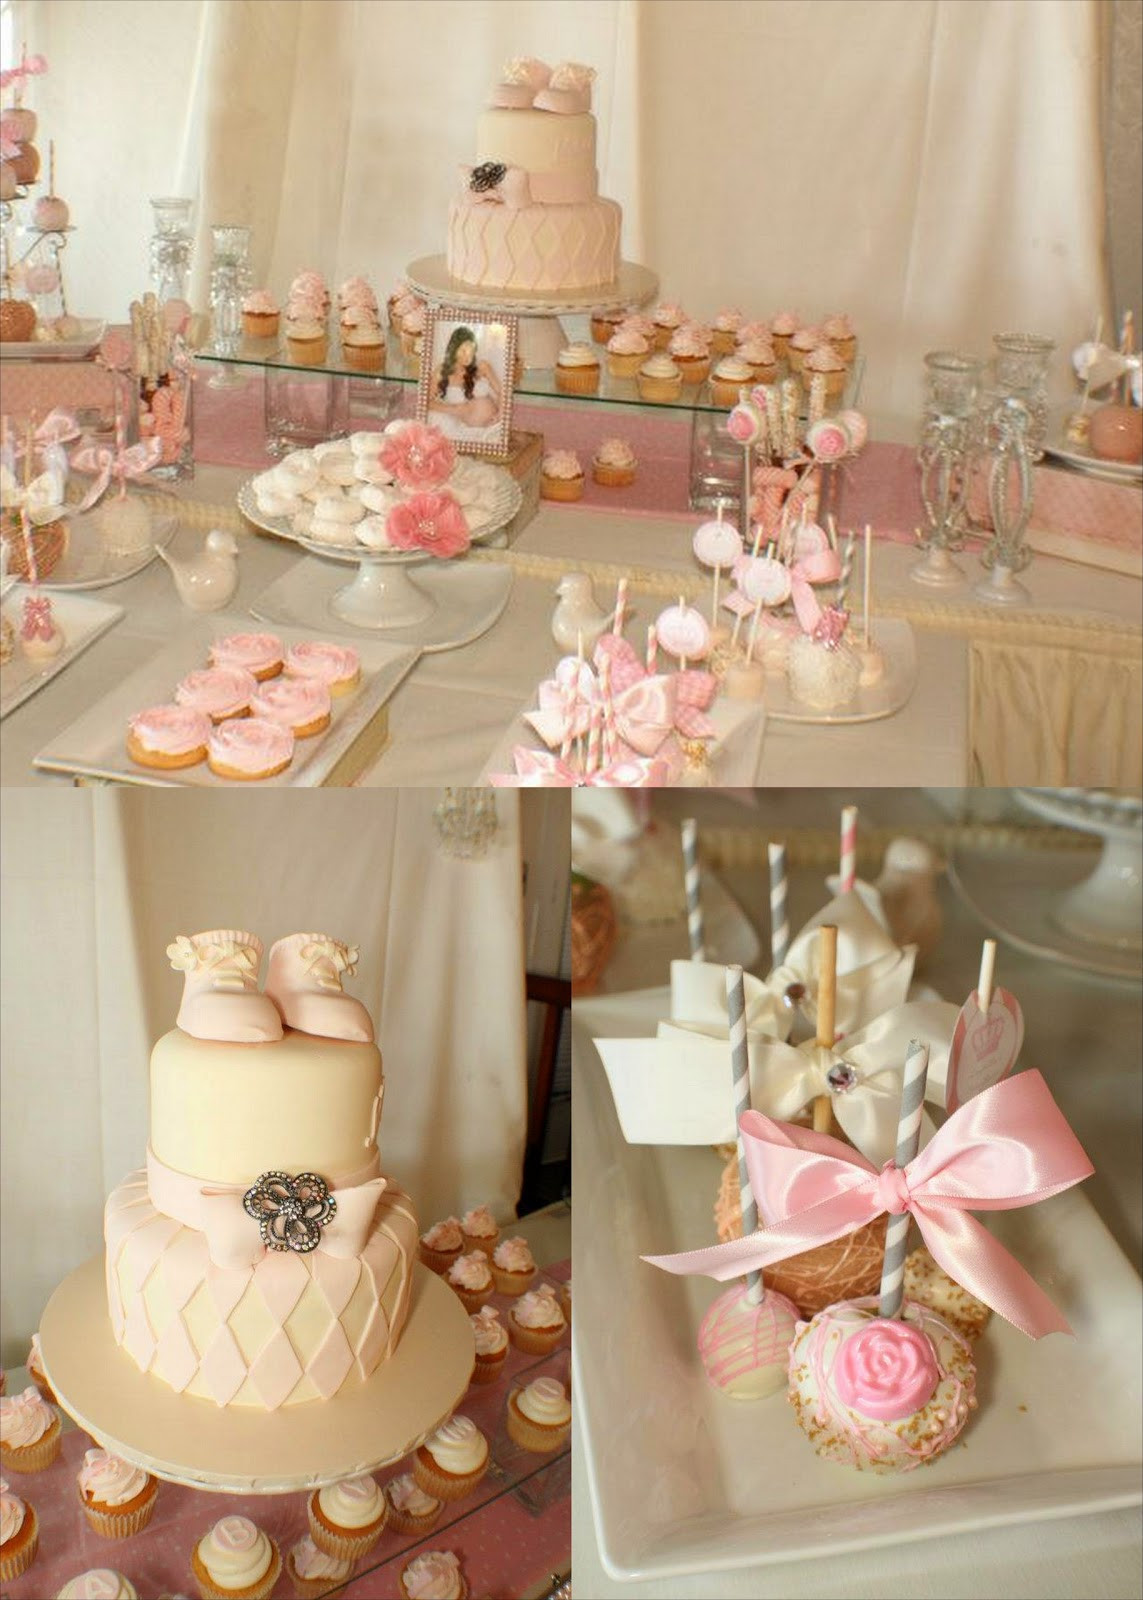 Baby Shower Decorating Ideas
 MKR Creations Shabby Chic Baby Shower